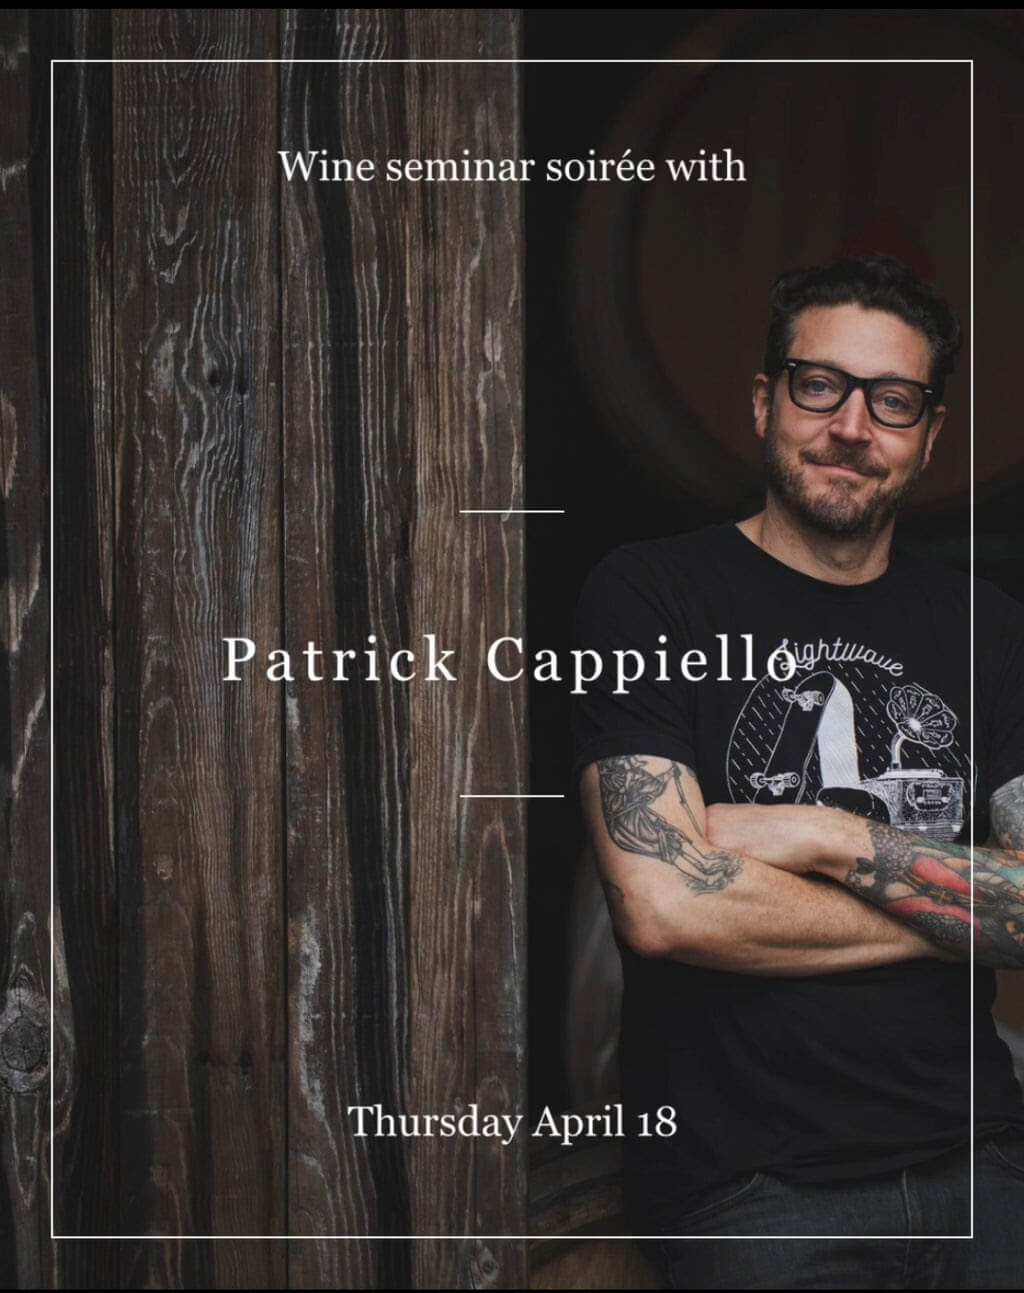 Patrick Capiello to host an exculsive tasting event